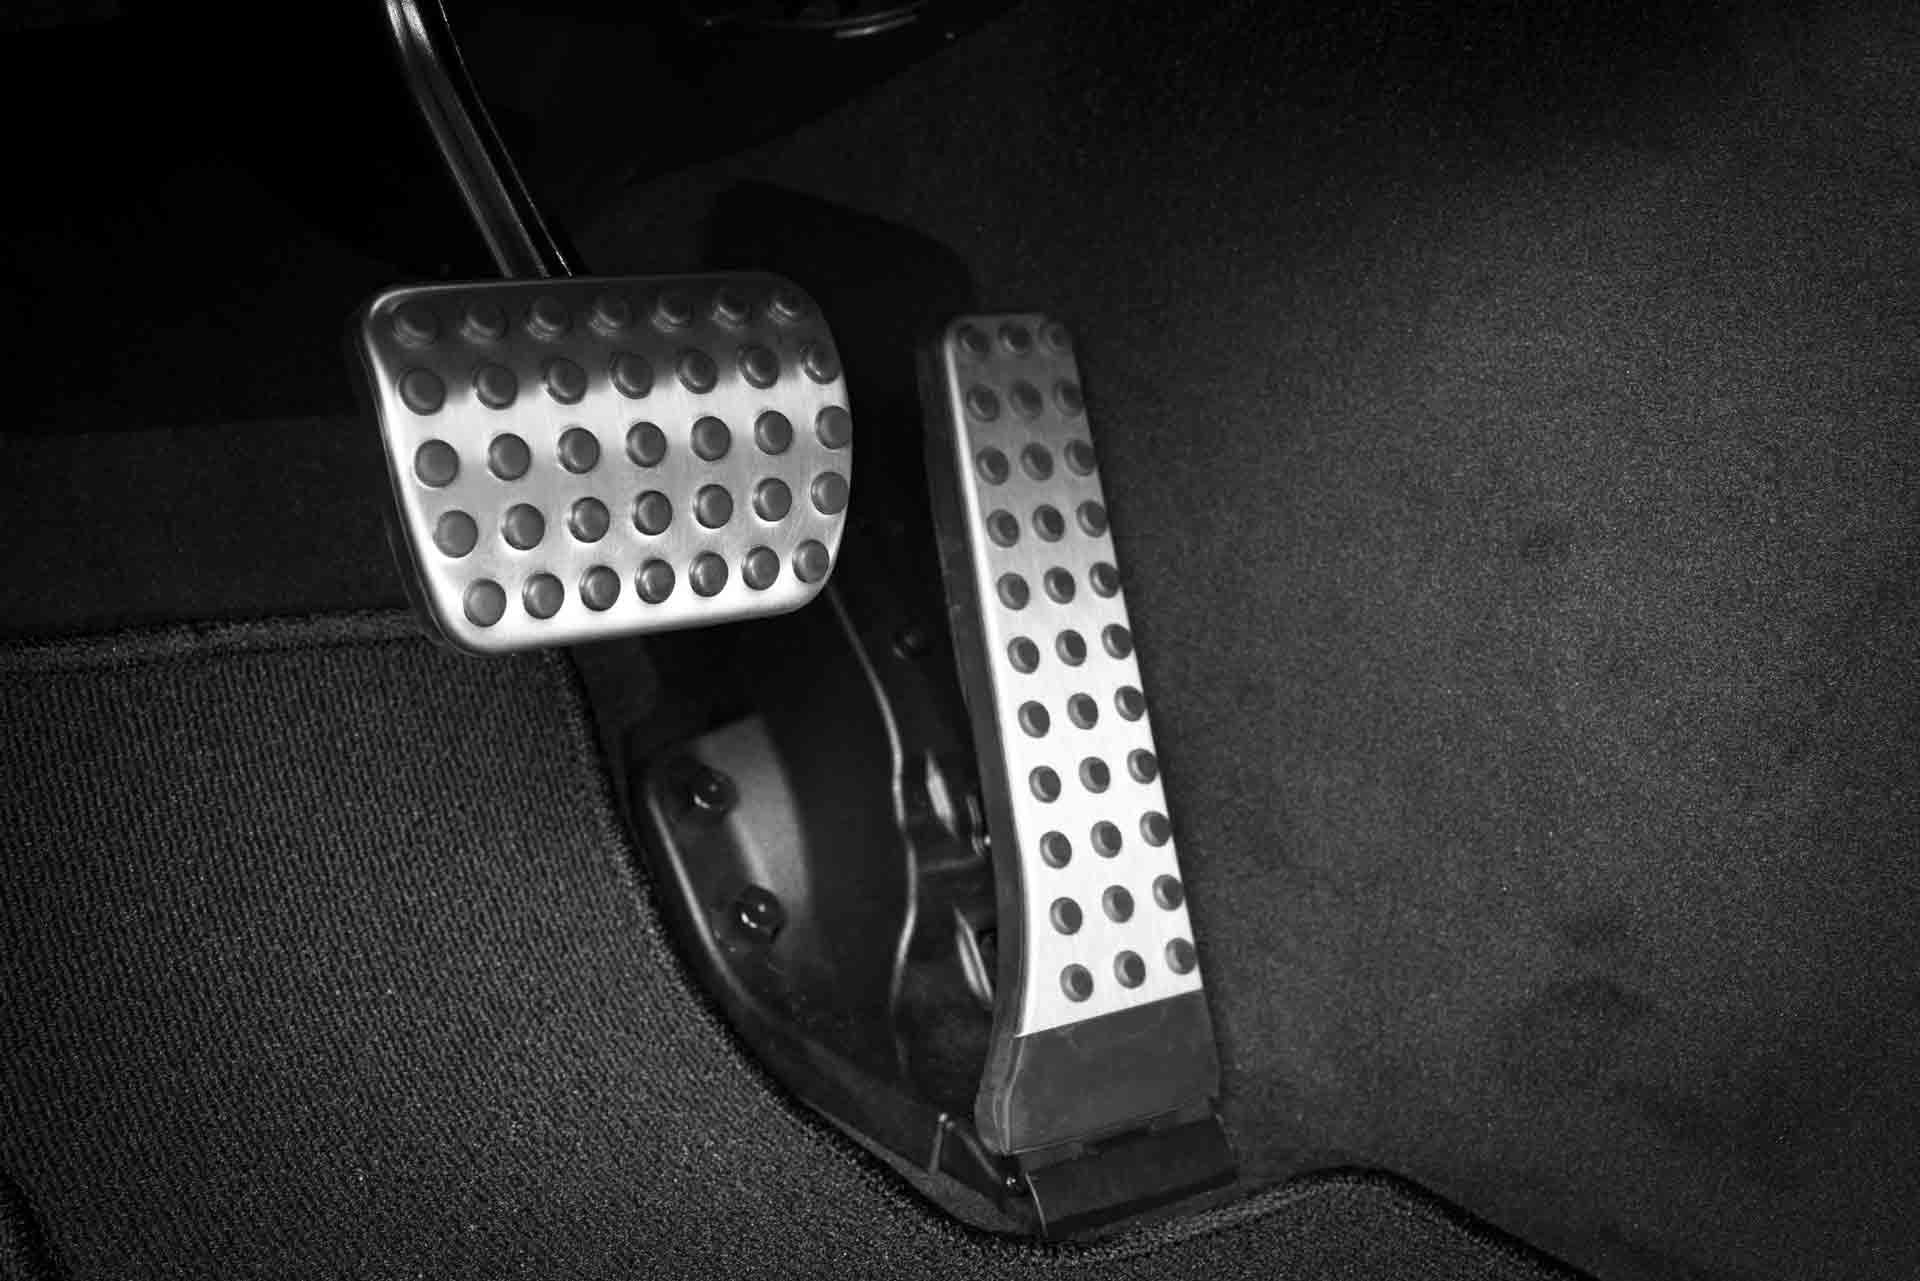 the brake and gas pedal in a car